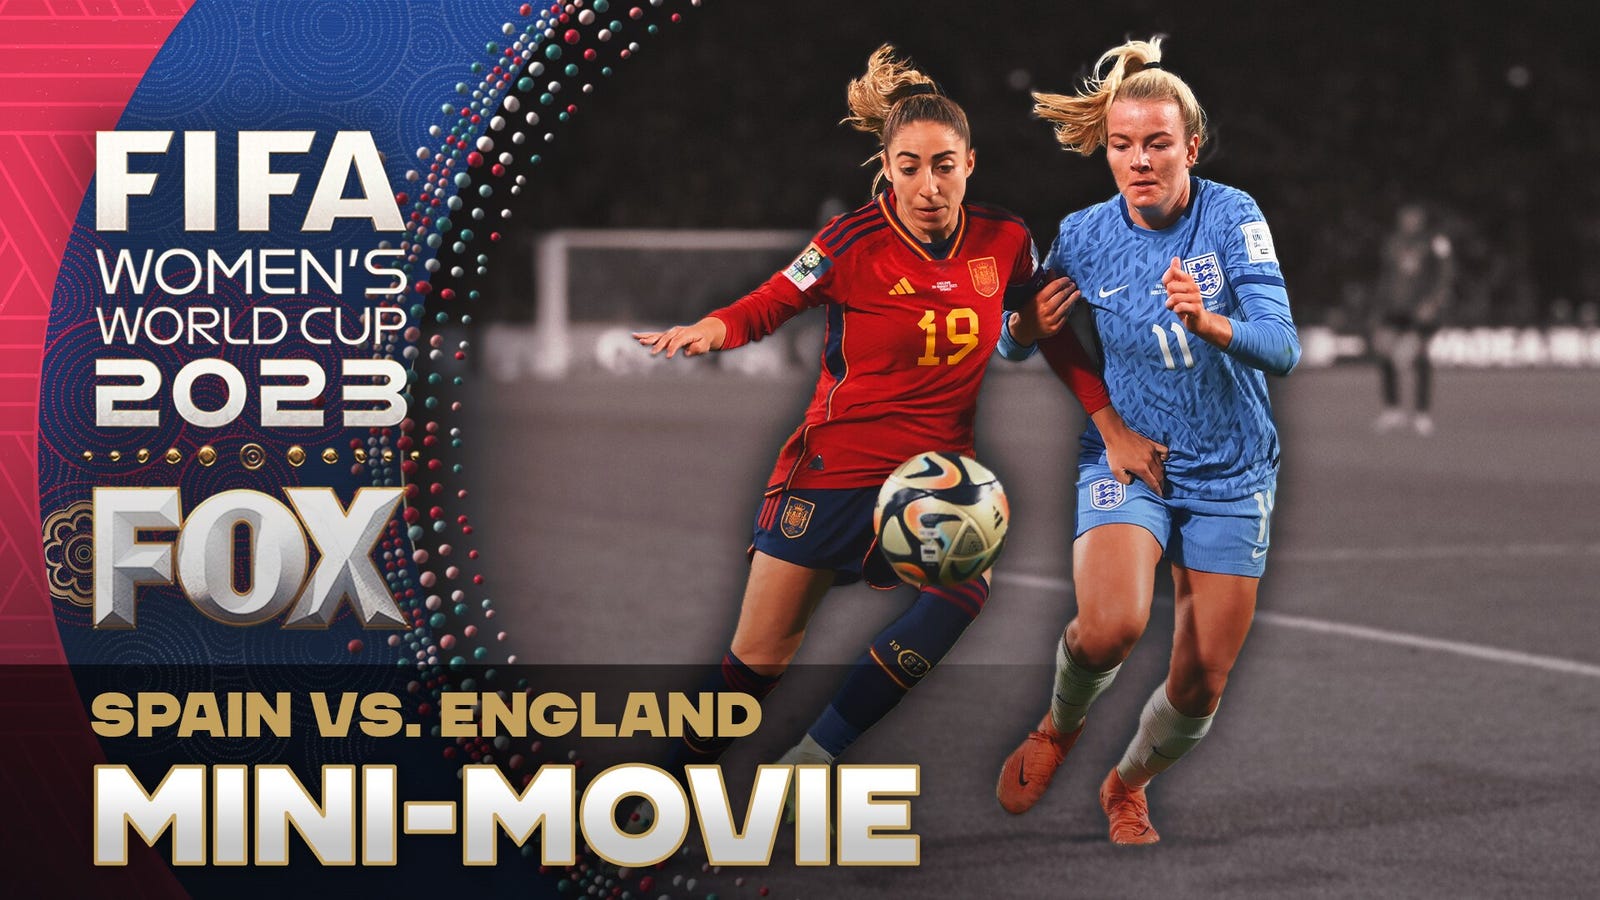 Mini-Movie: Spain vs. England in the 2023 FIFA Women's World Cup Final